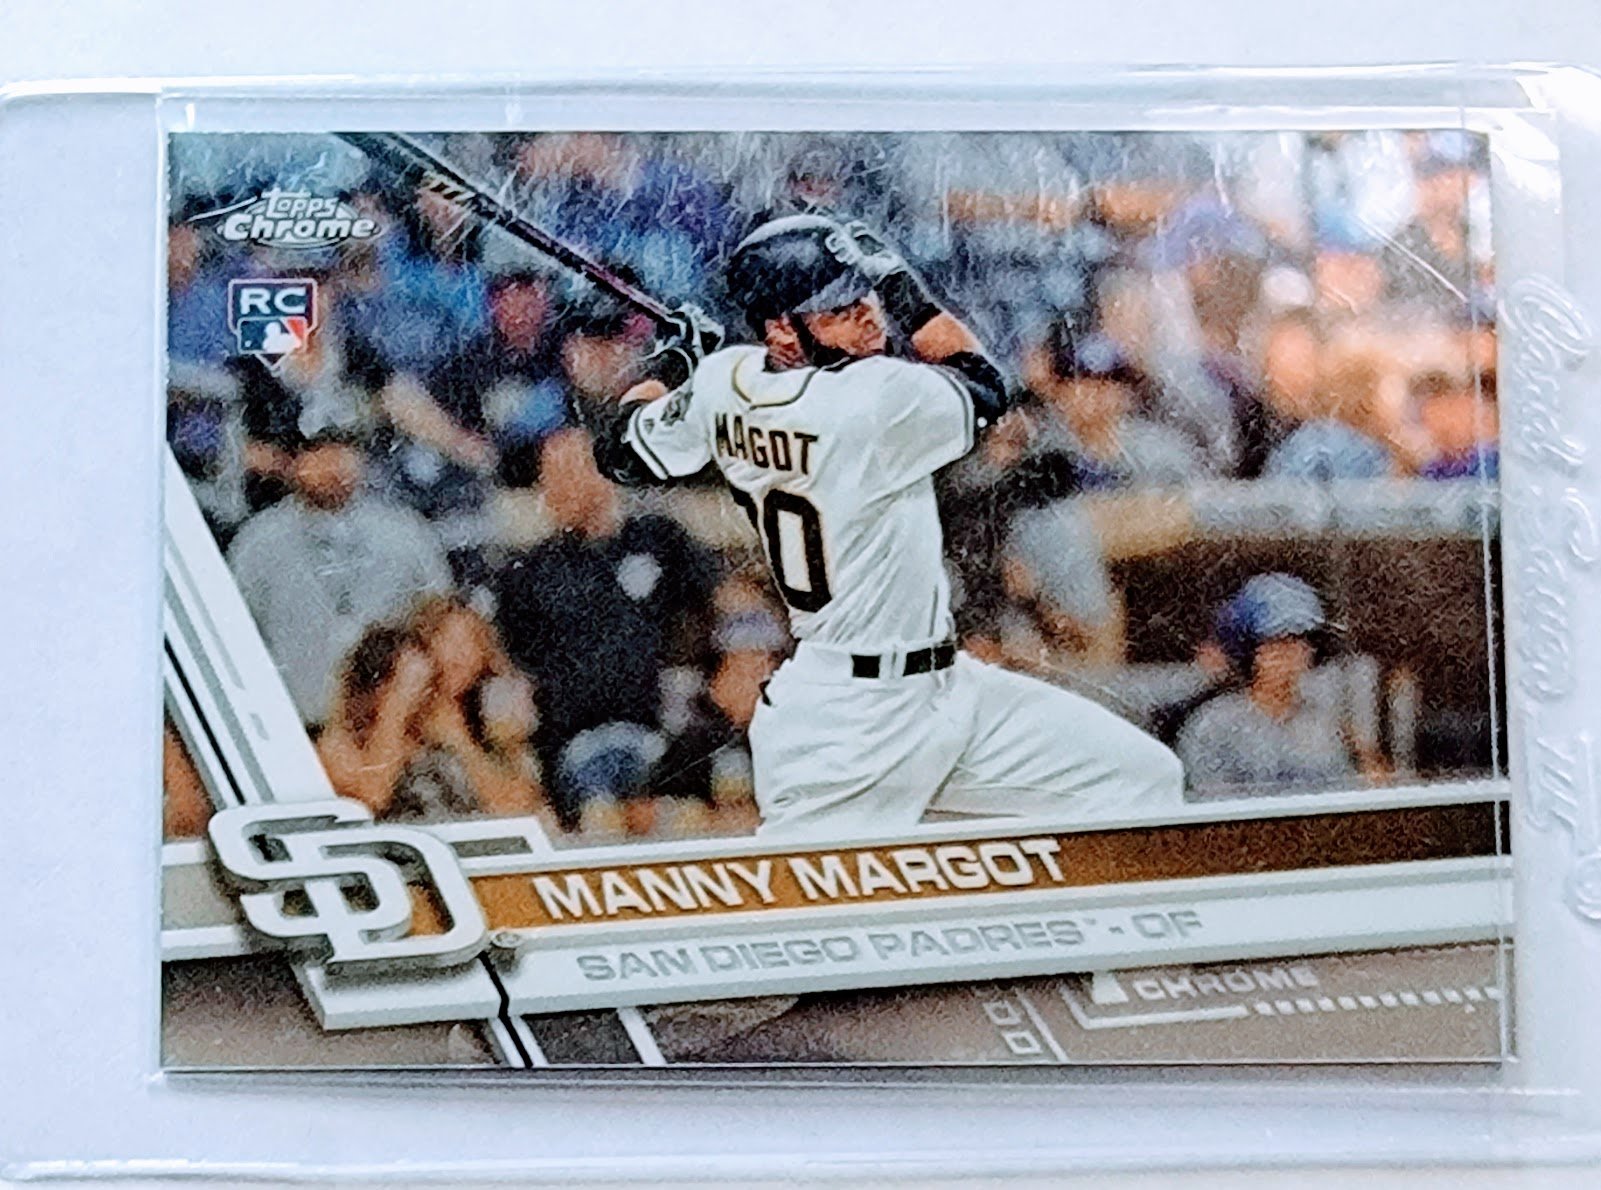 2017 Topps Chrome Manny Margot Rookie Baseball Card TPTV simple Xclusive Collectibles   